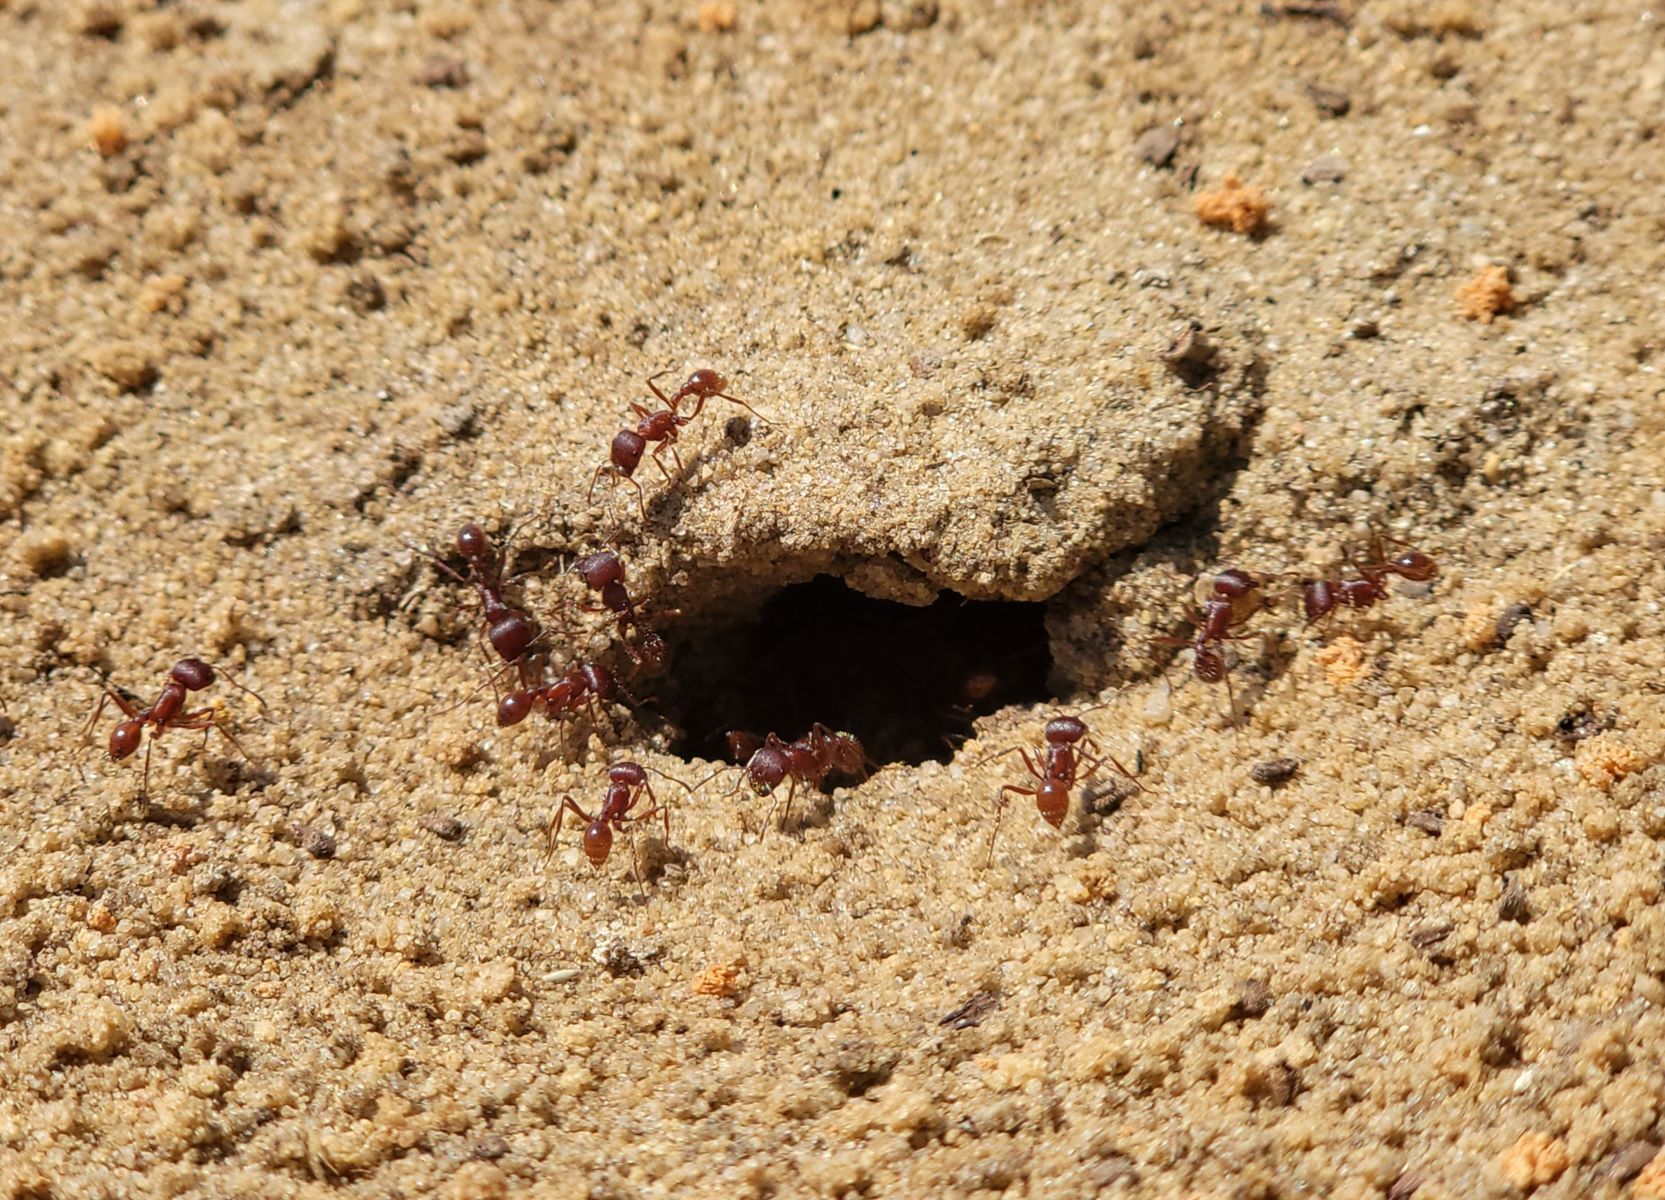 Ants labor to excavate tunnels, protect the nest, and care for young.